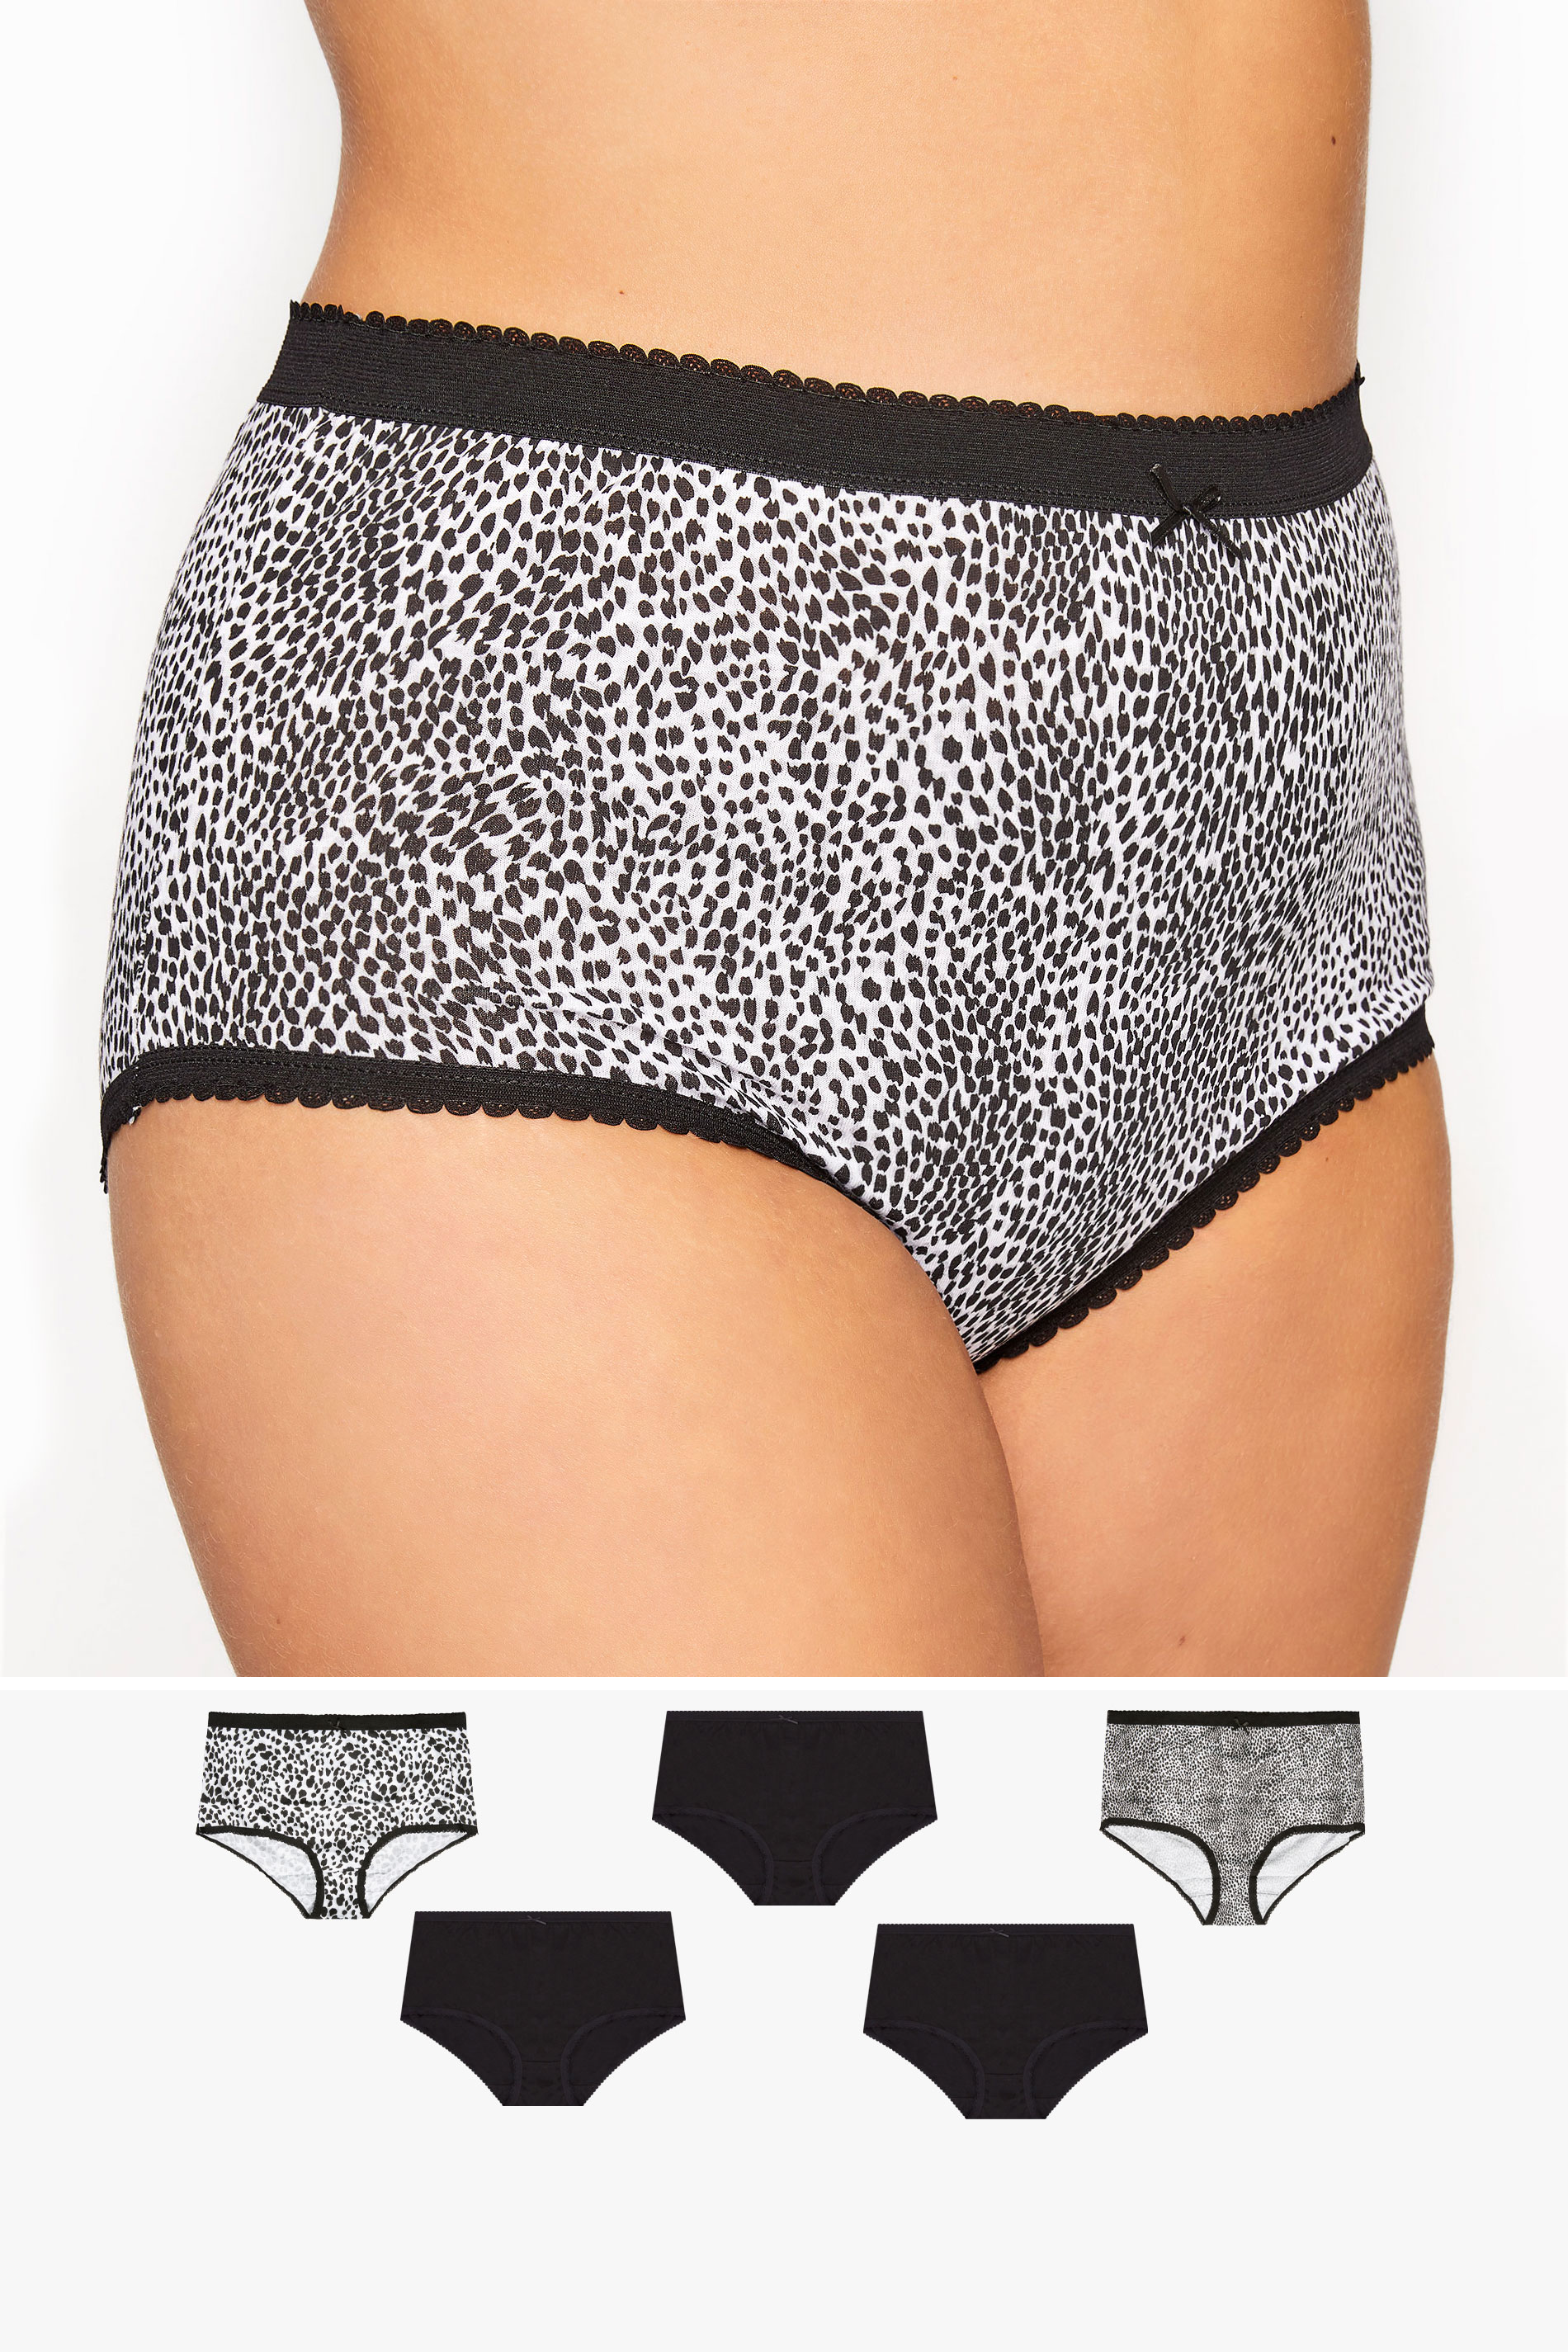 5 PACK Black & White Leopard Print High Waisted Full Briefs | Yours Clothing 1